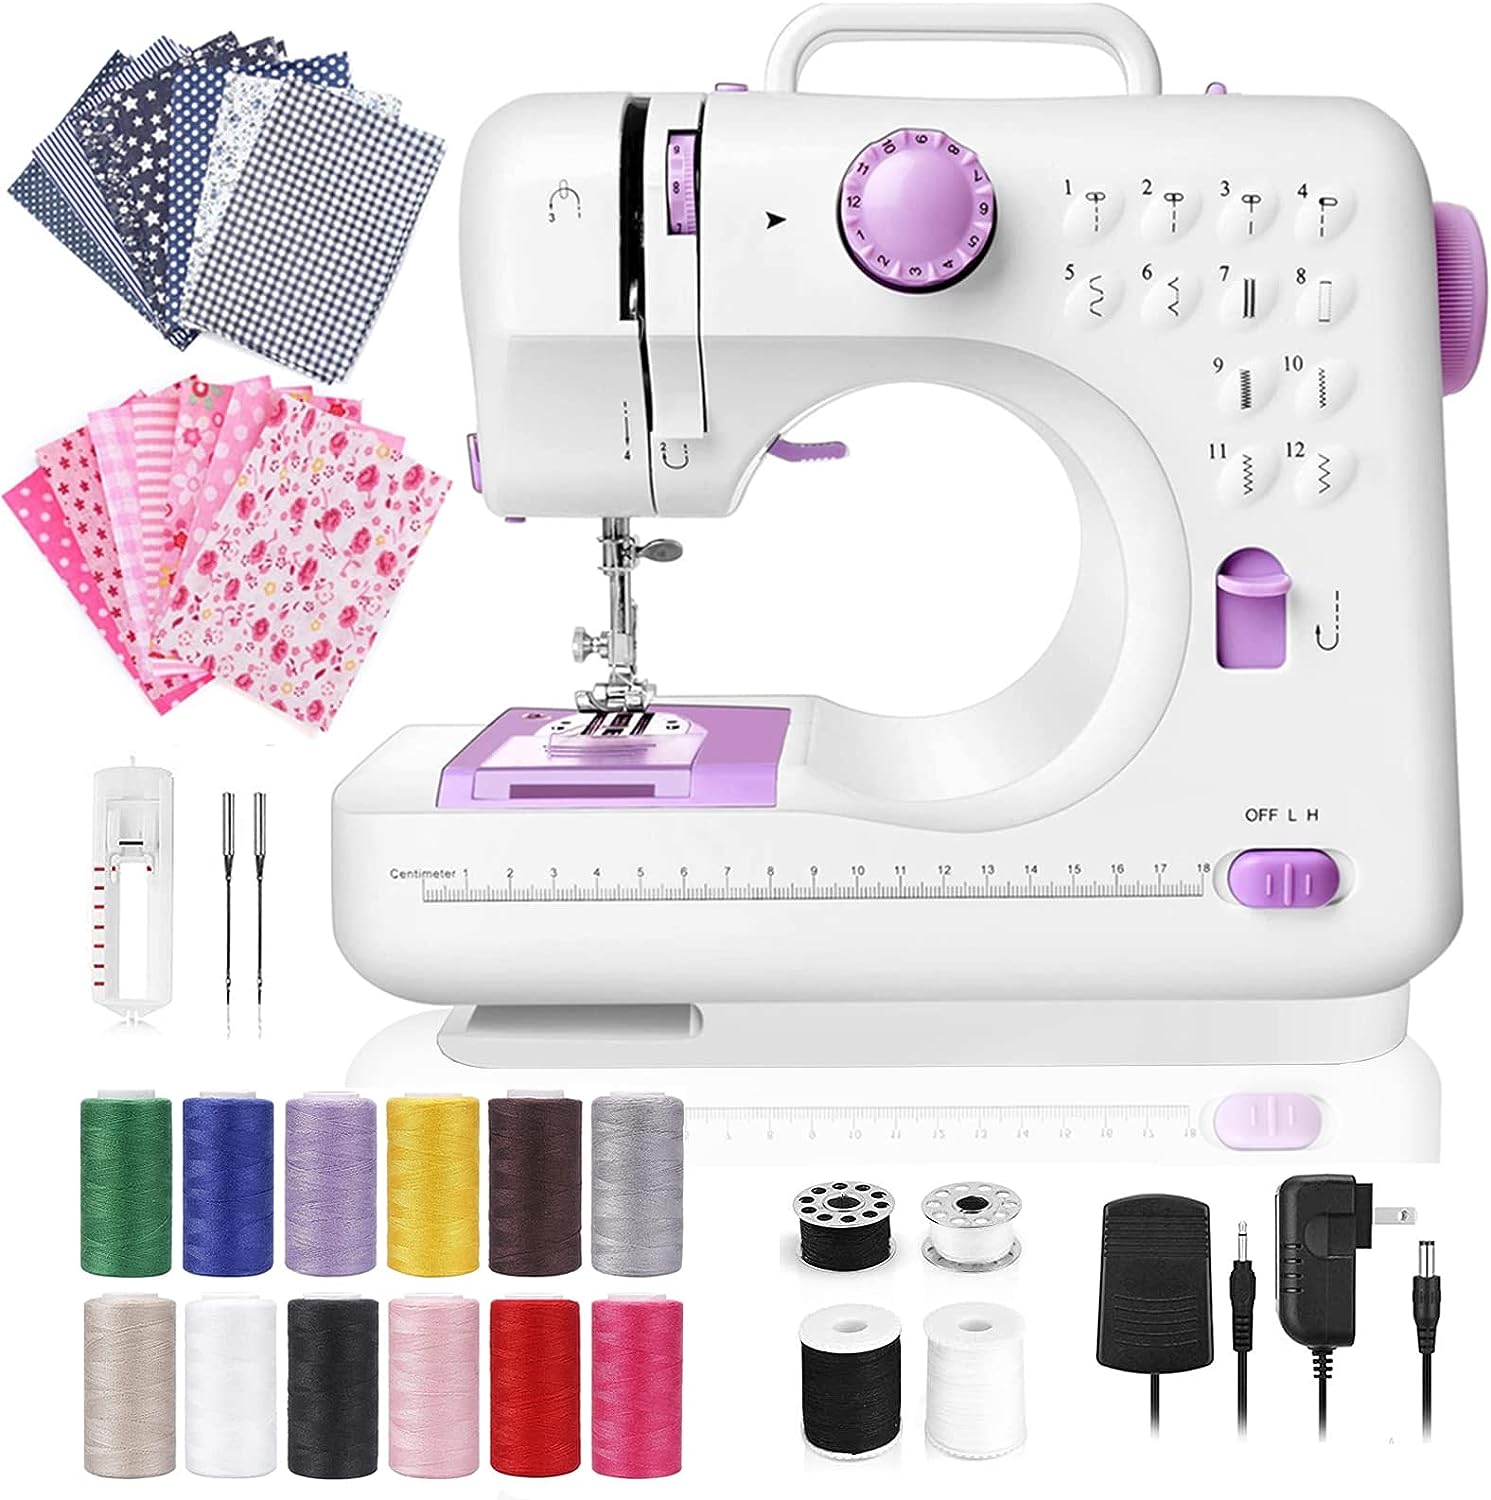 Dechow Sewing Machine for Beginners, Electric Mini Portable, 12 Built-in  Stitches with Reverse Sewing, 2 Speeds Double Thread with Foot Pedal,  Floral Cotton Fabric and Sewing Threads Set(Purple)